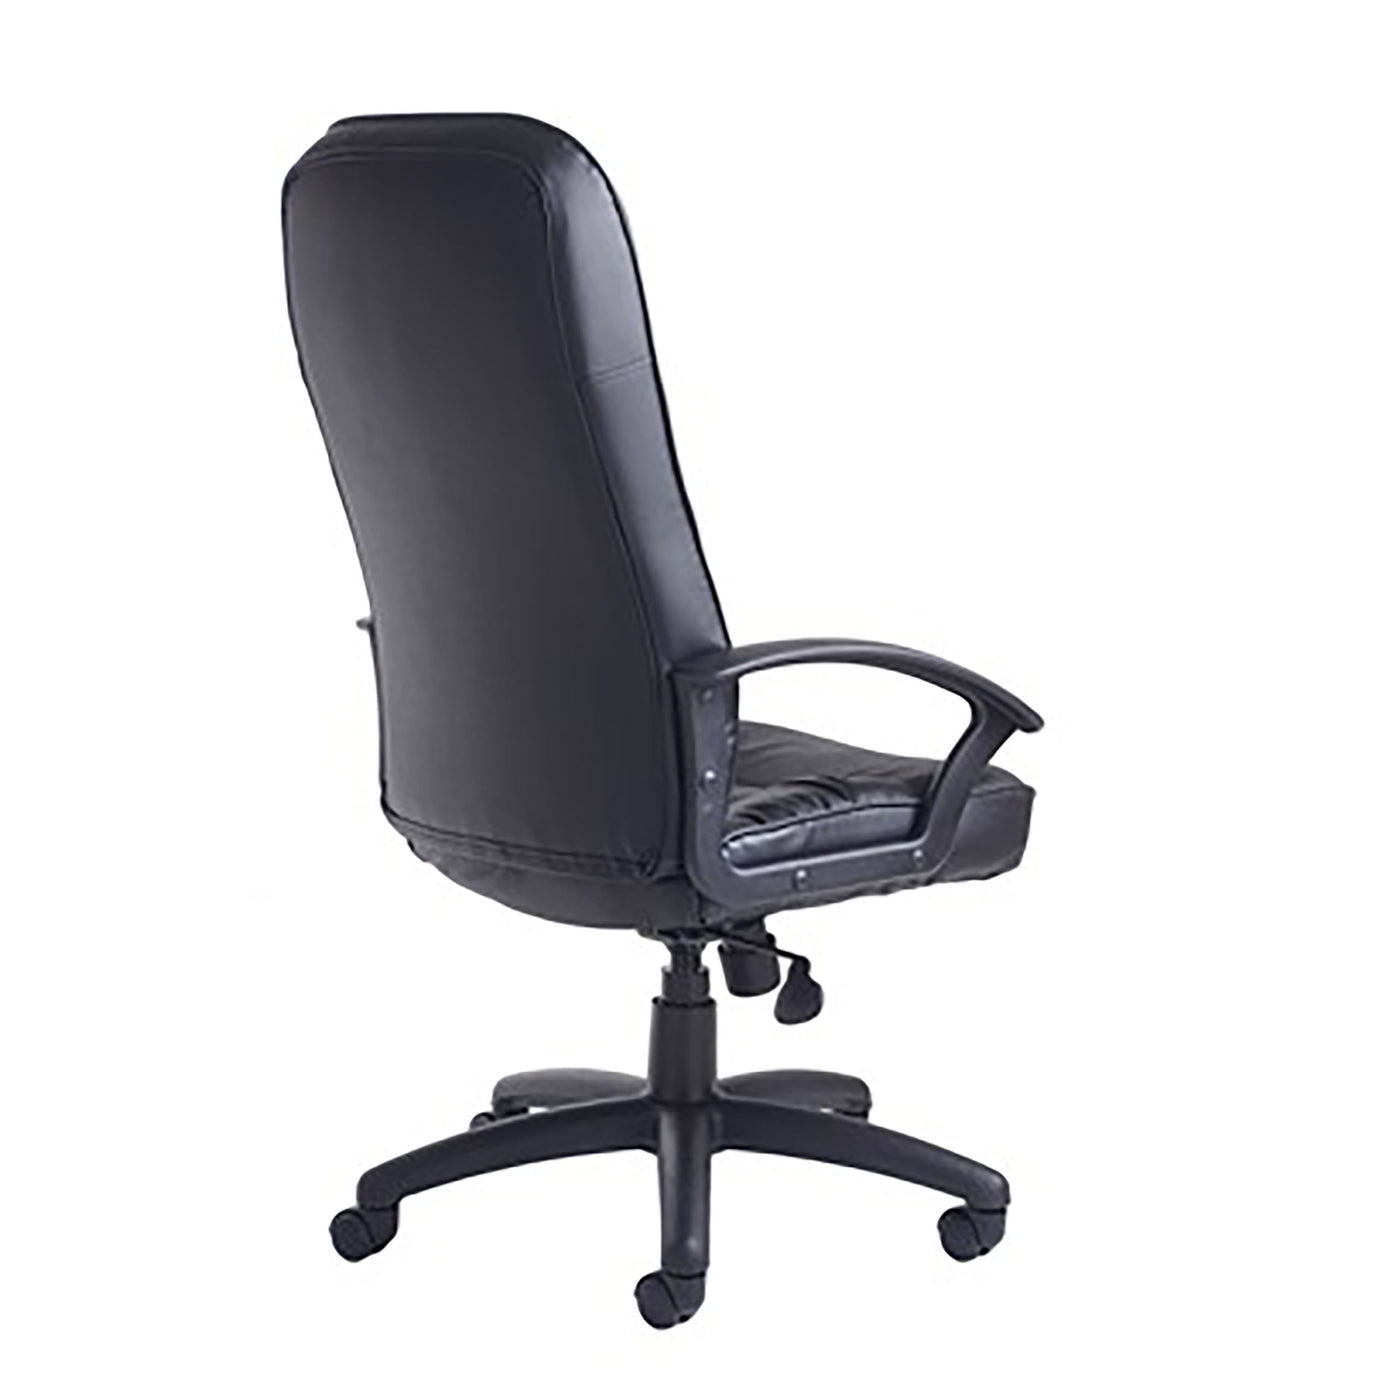 King Black Leather Faced Home Office Chair | Home Office Furniture | Ergonomic Office Chair | Home Office Furnishings